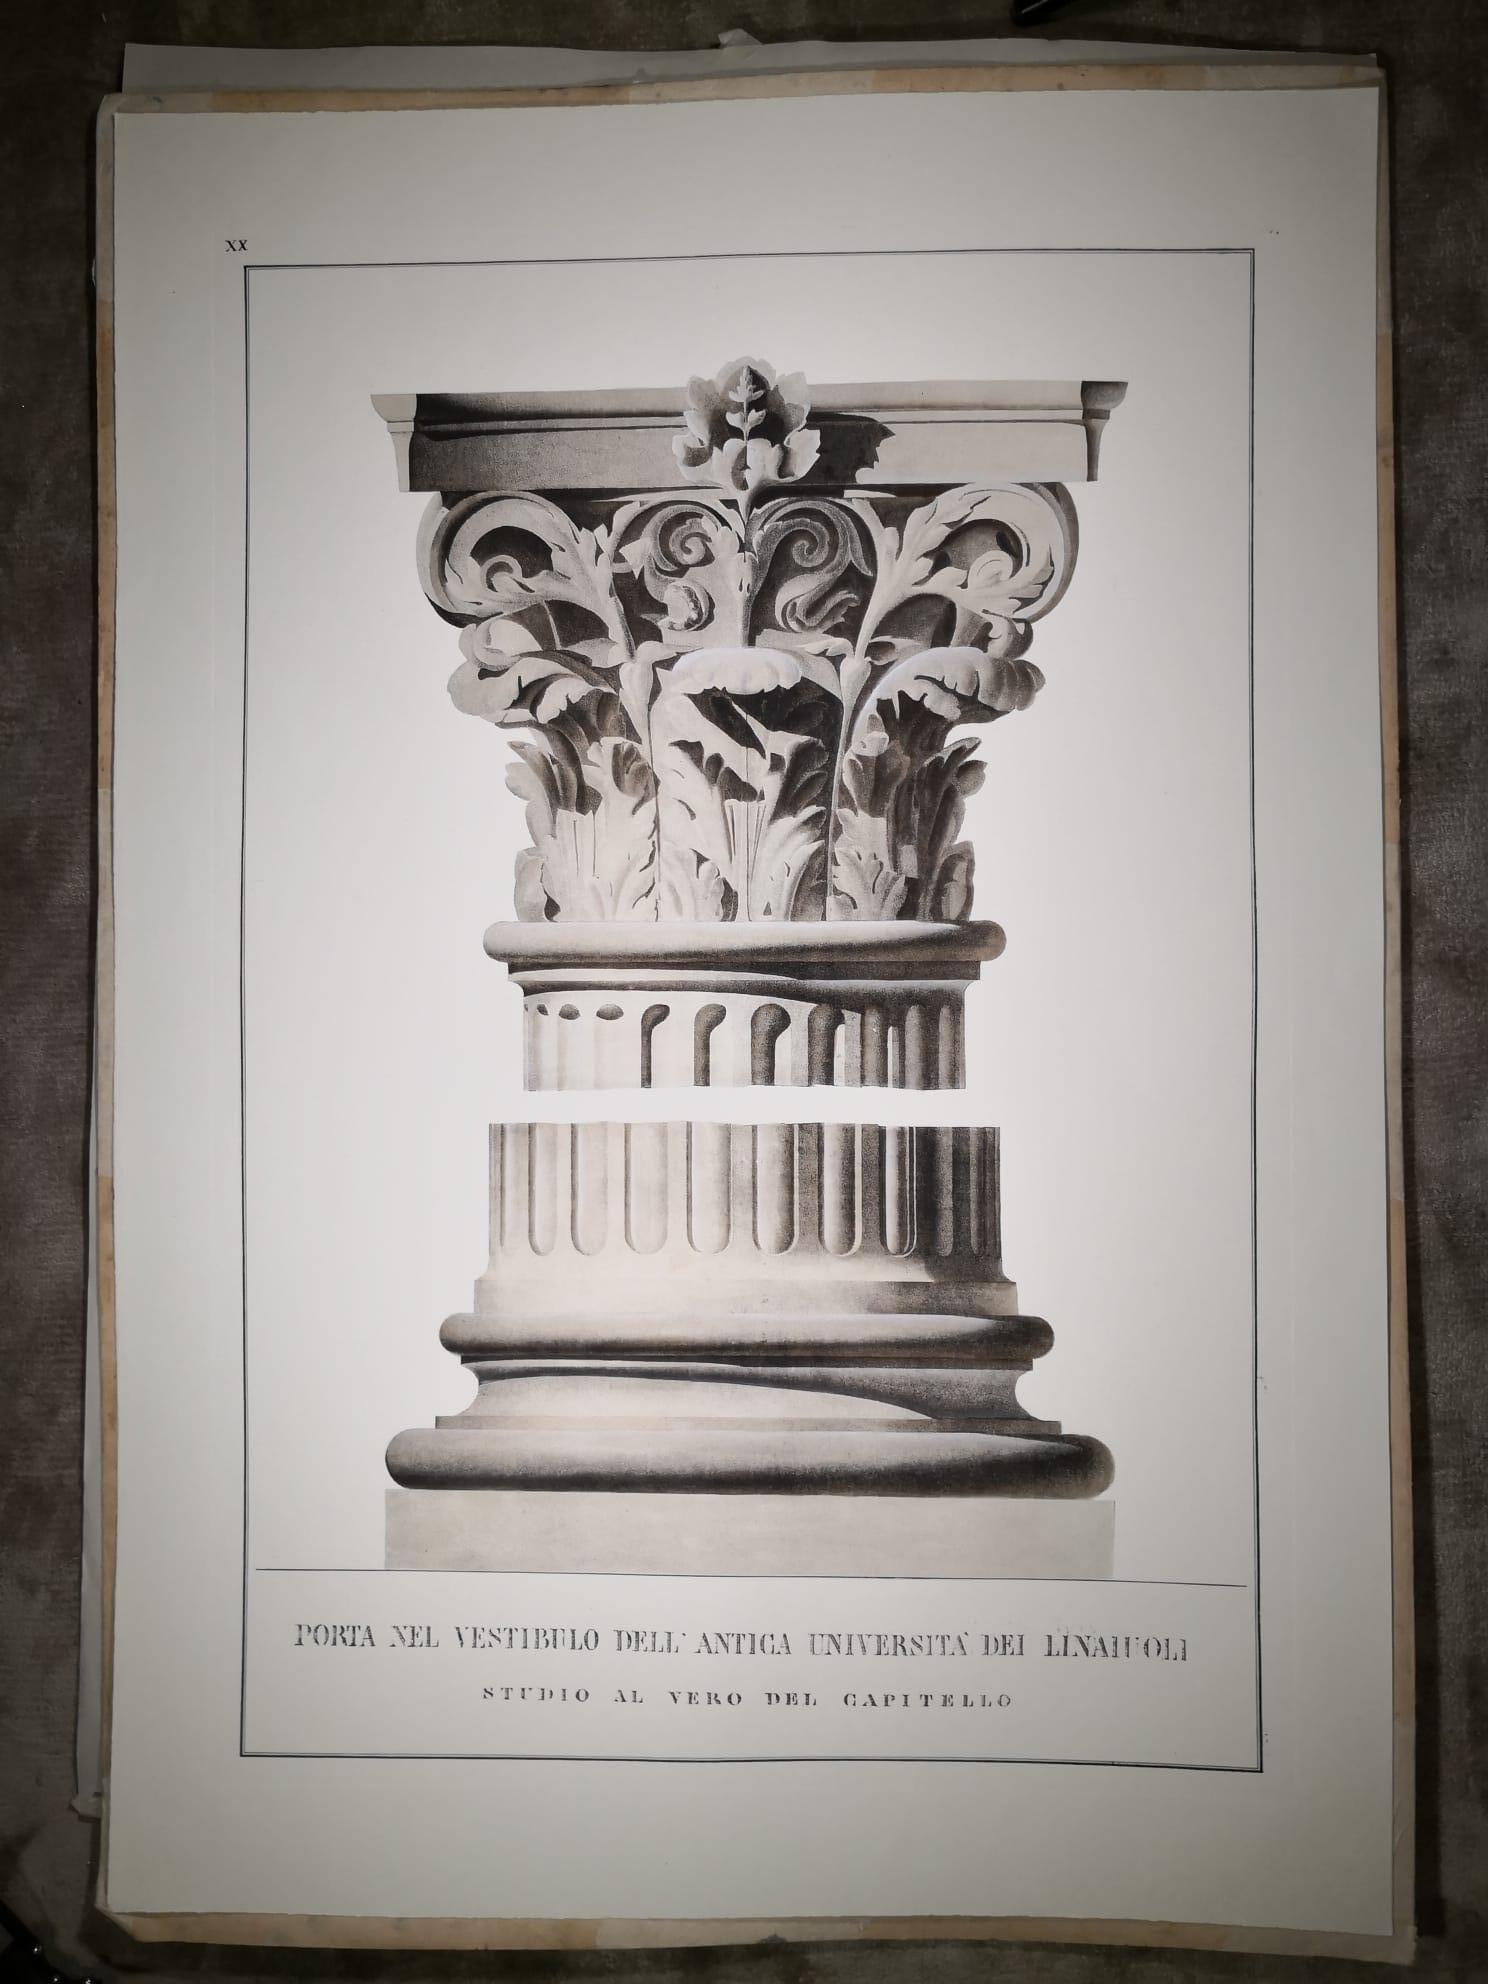 A rare extra-large print, printed on engraving paper with an antique star press and watercoloured by hand representing an antique capital. The capital's from a collection of architectural details of Florence's monuments painted in Italy in the